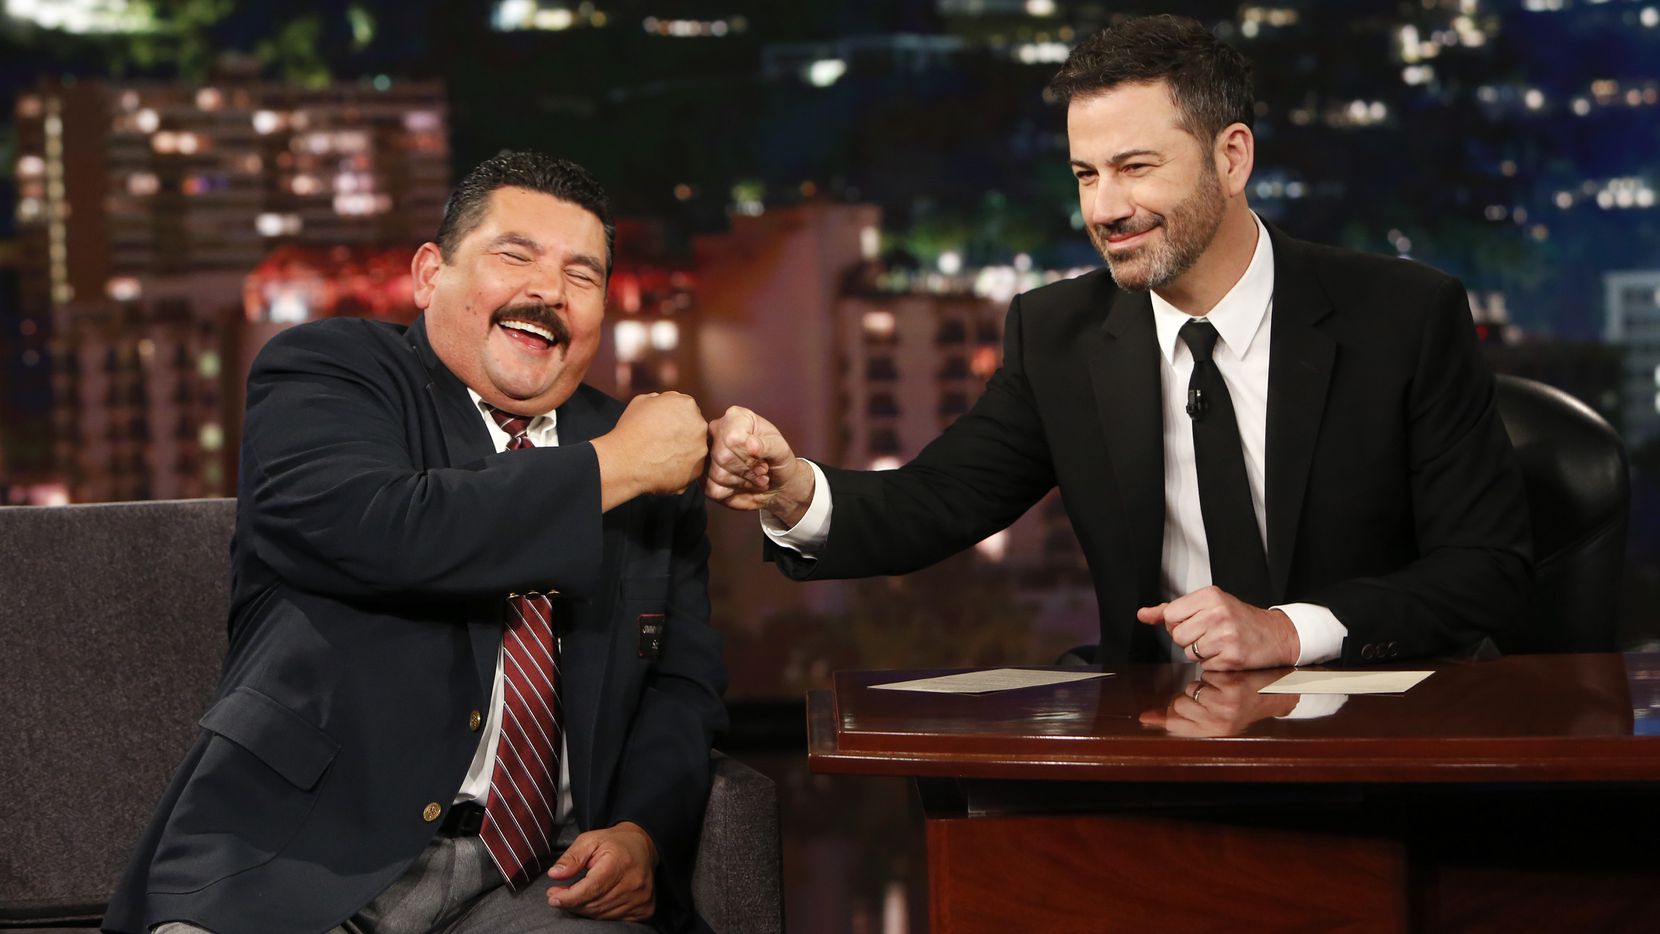 Guillermo Rodriguez is Jimmy Kimmel's sidekick on his late-night TV show on ABC. Guillermo is traveling to Dallas for a one-night-only stop at Mariano's Hacienda in Dallas on Oct. 14, 2019.